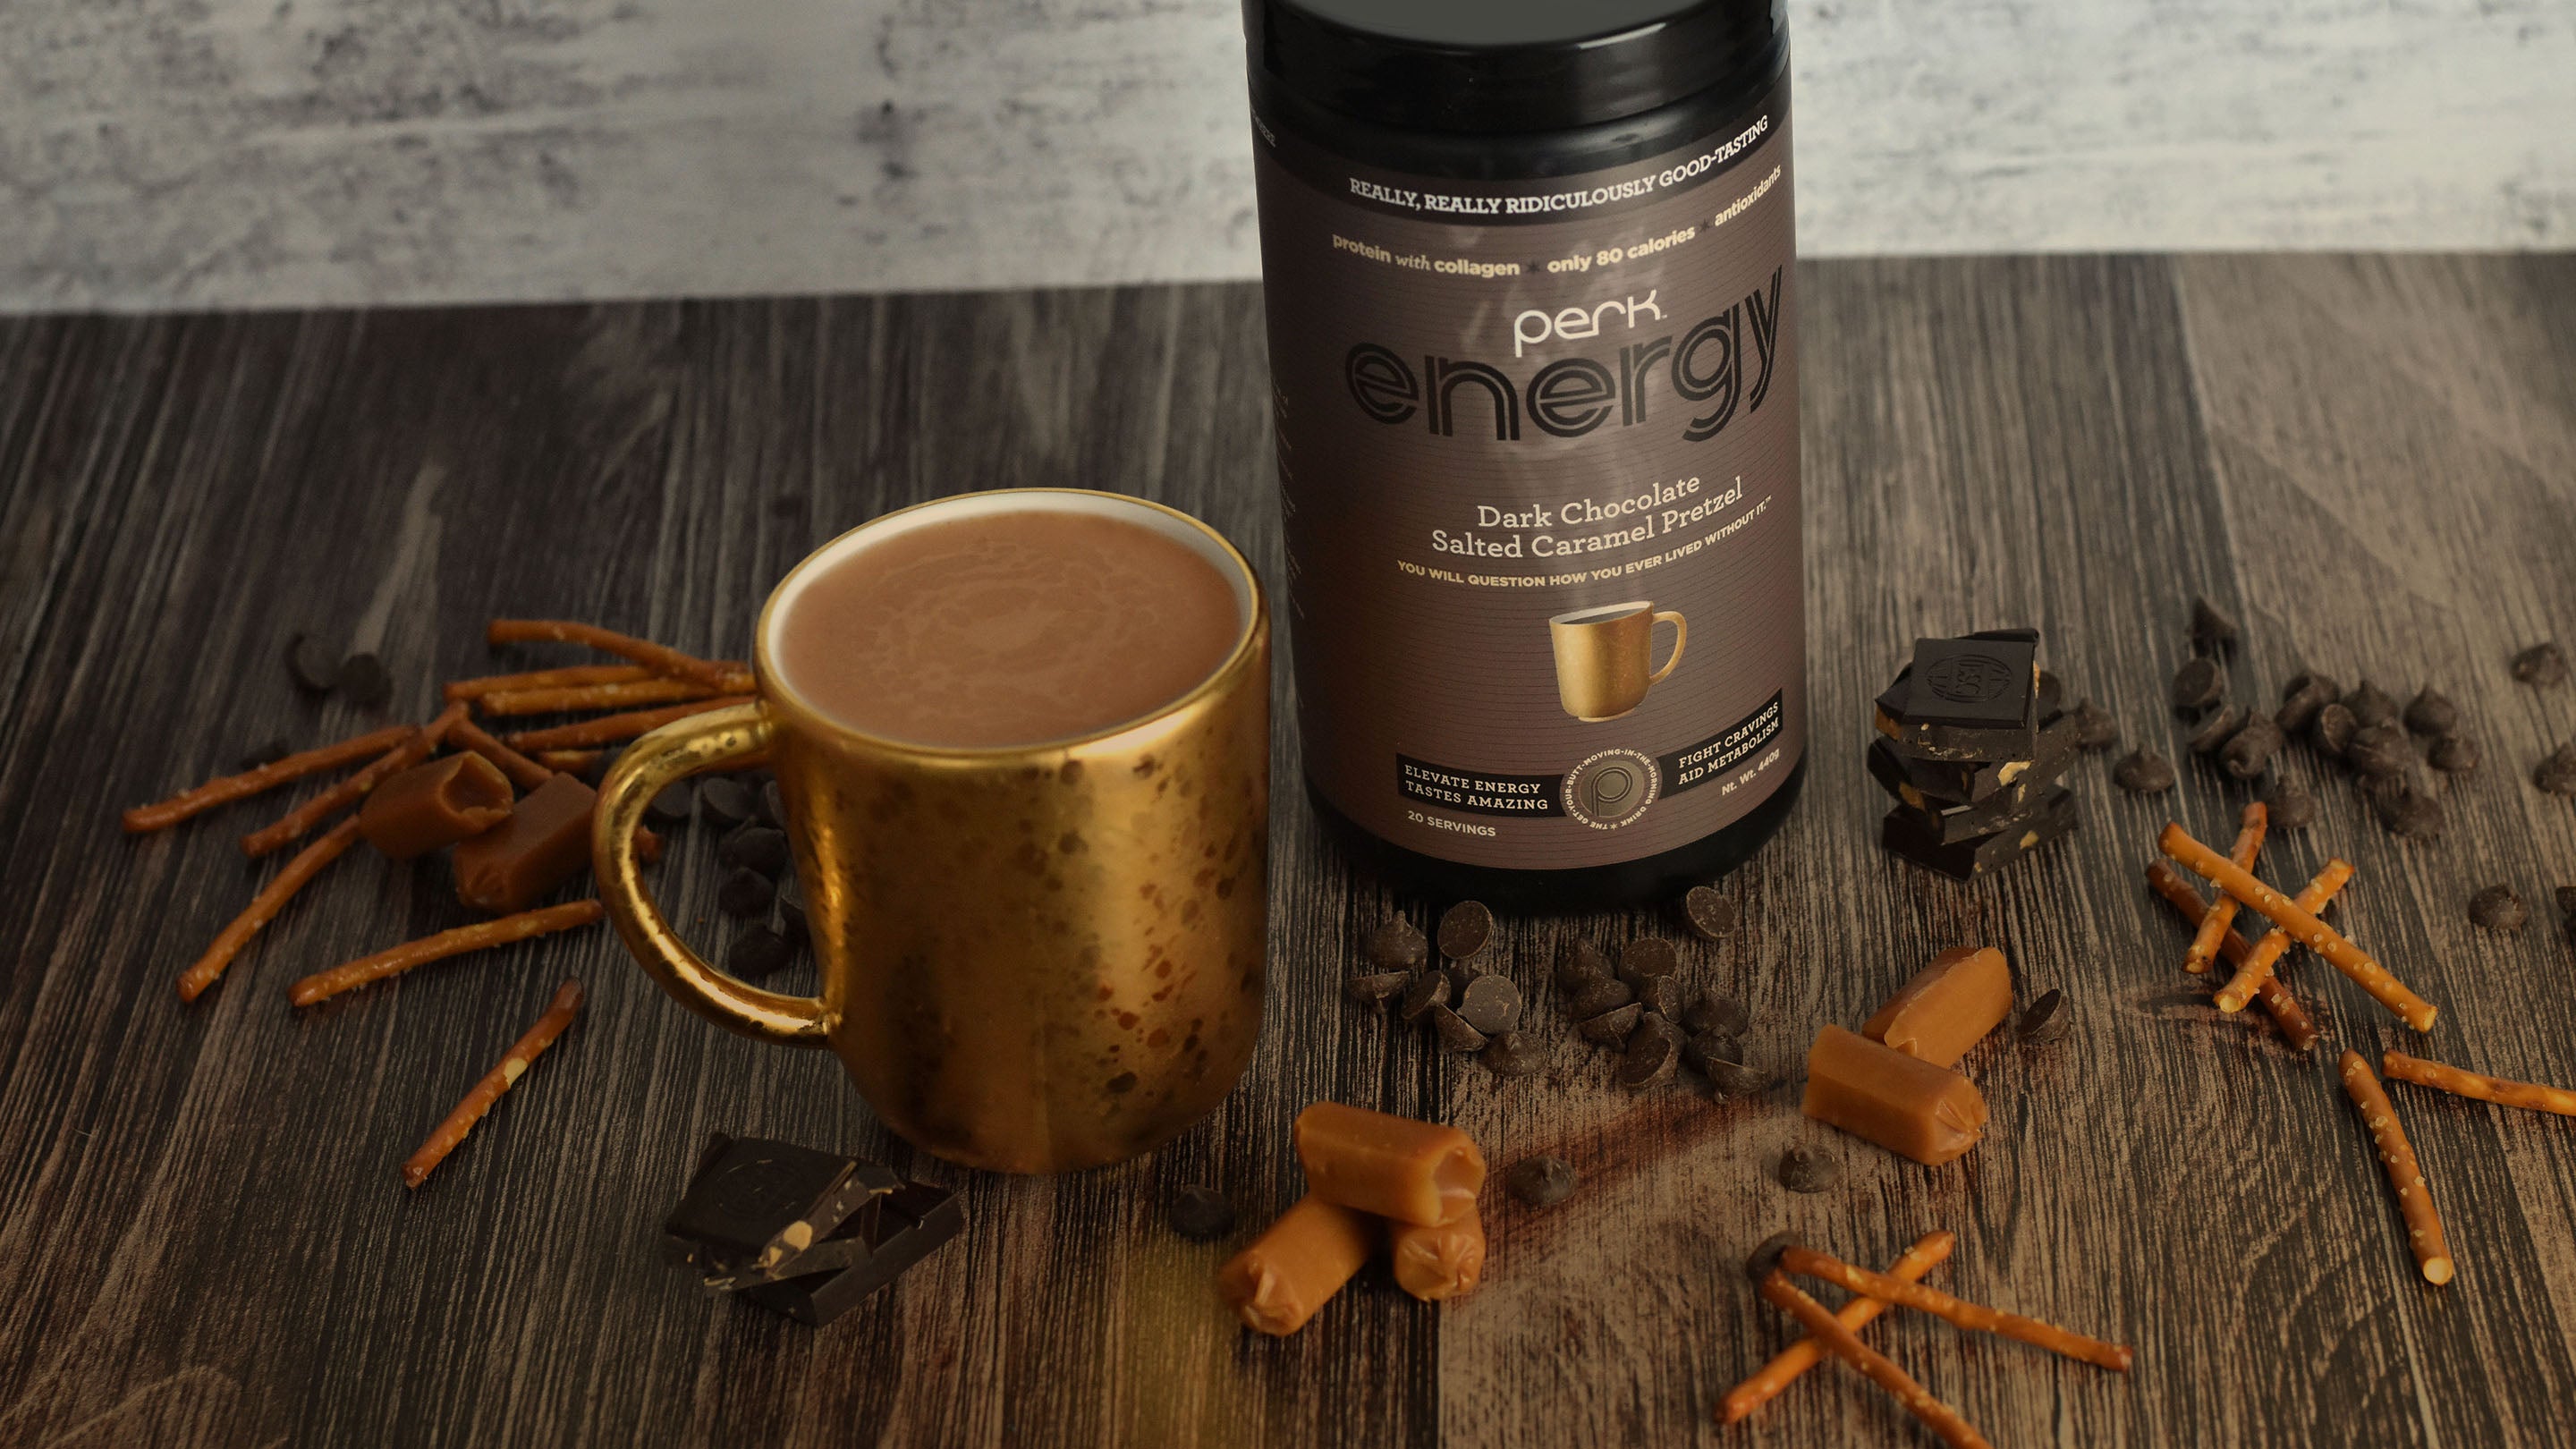 Perk Energy Dark Chocolate Salted Caramel Pretzel canister next to a cup of the drink